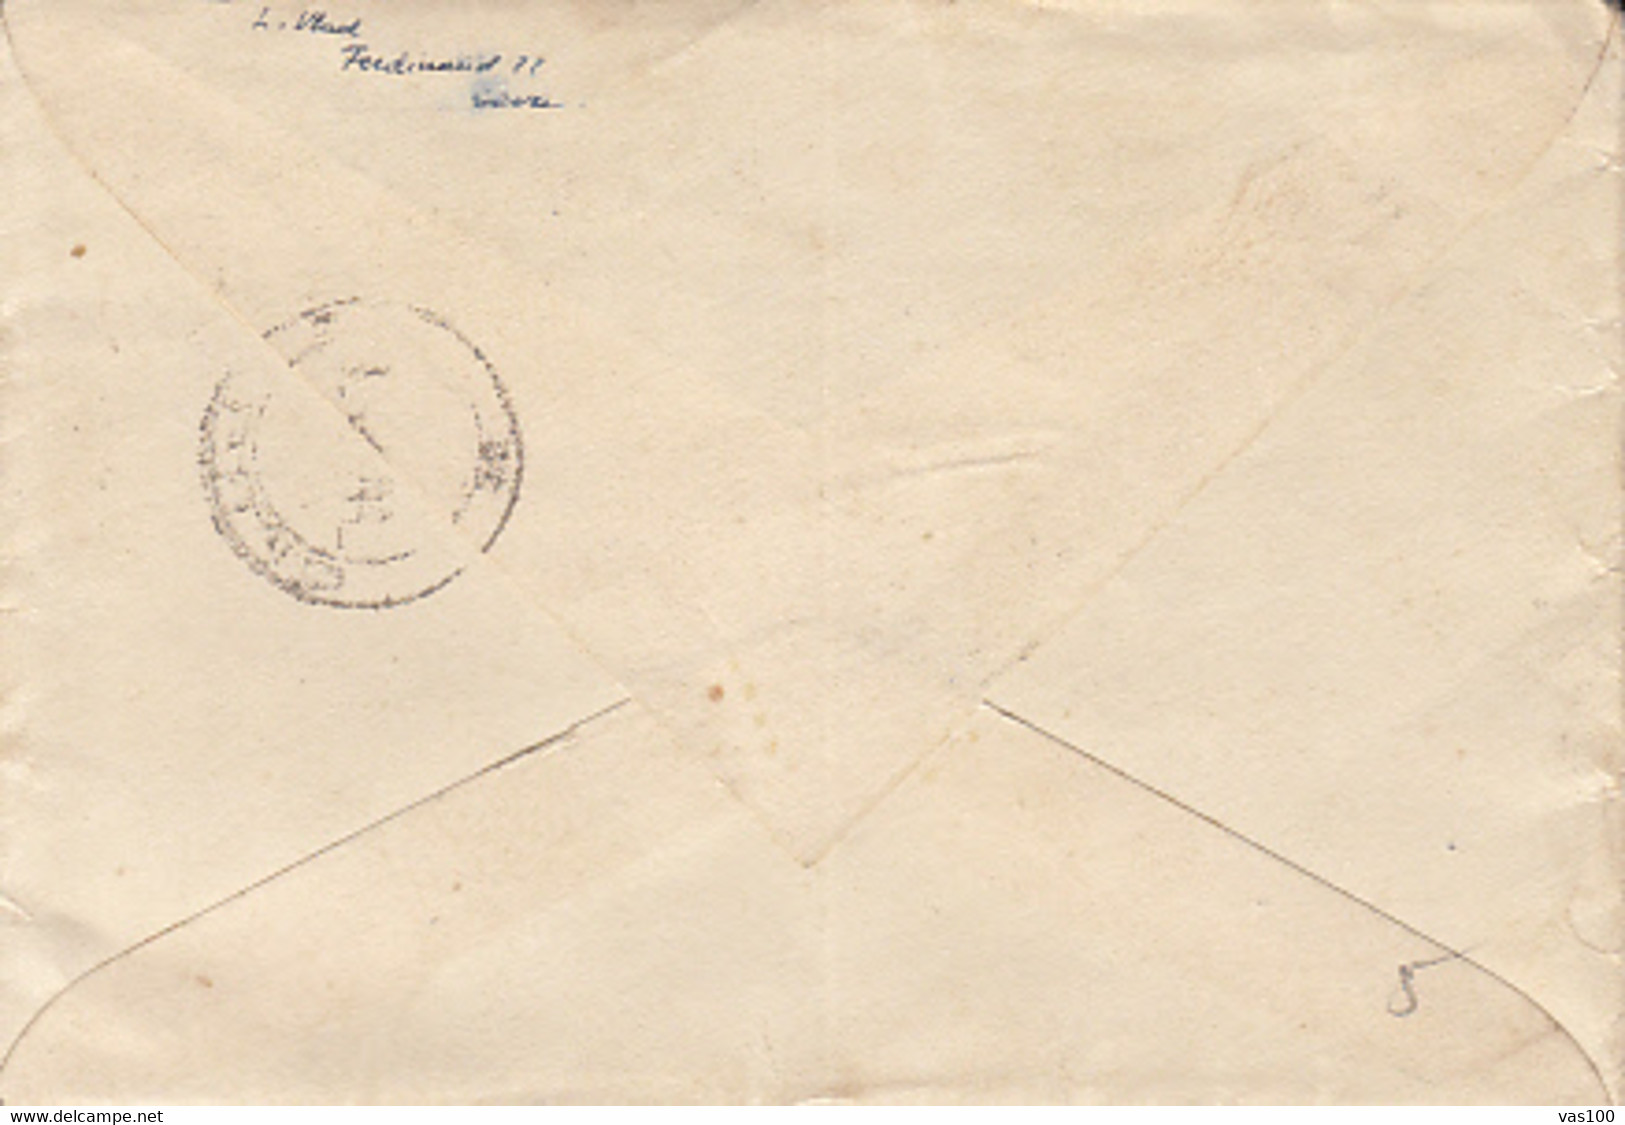 IOVR OVERPRINT REVENUE STAMP, KING MICHAEL, CONSTANTA HARBOUR, SHIP, STAMPS ON REGISTERED COVER, 1948, ROMANIA - Revenue Stamps